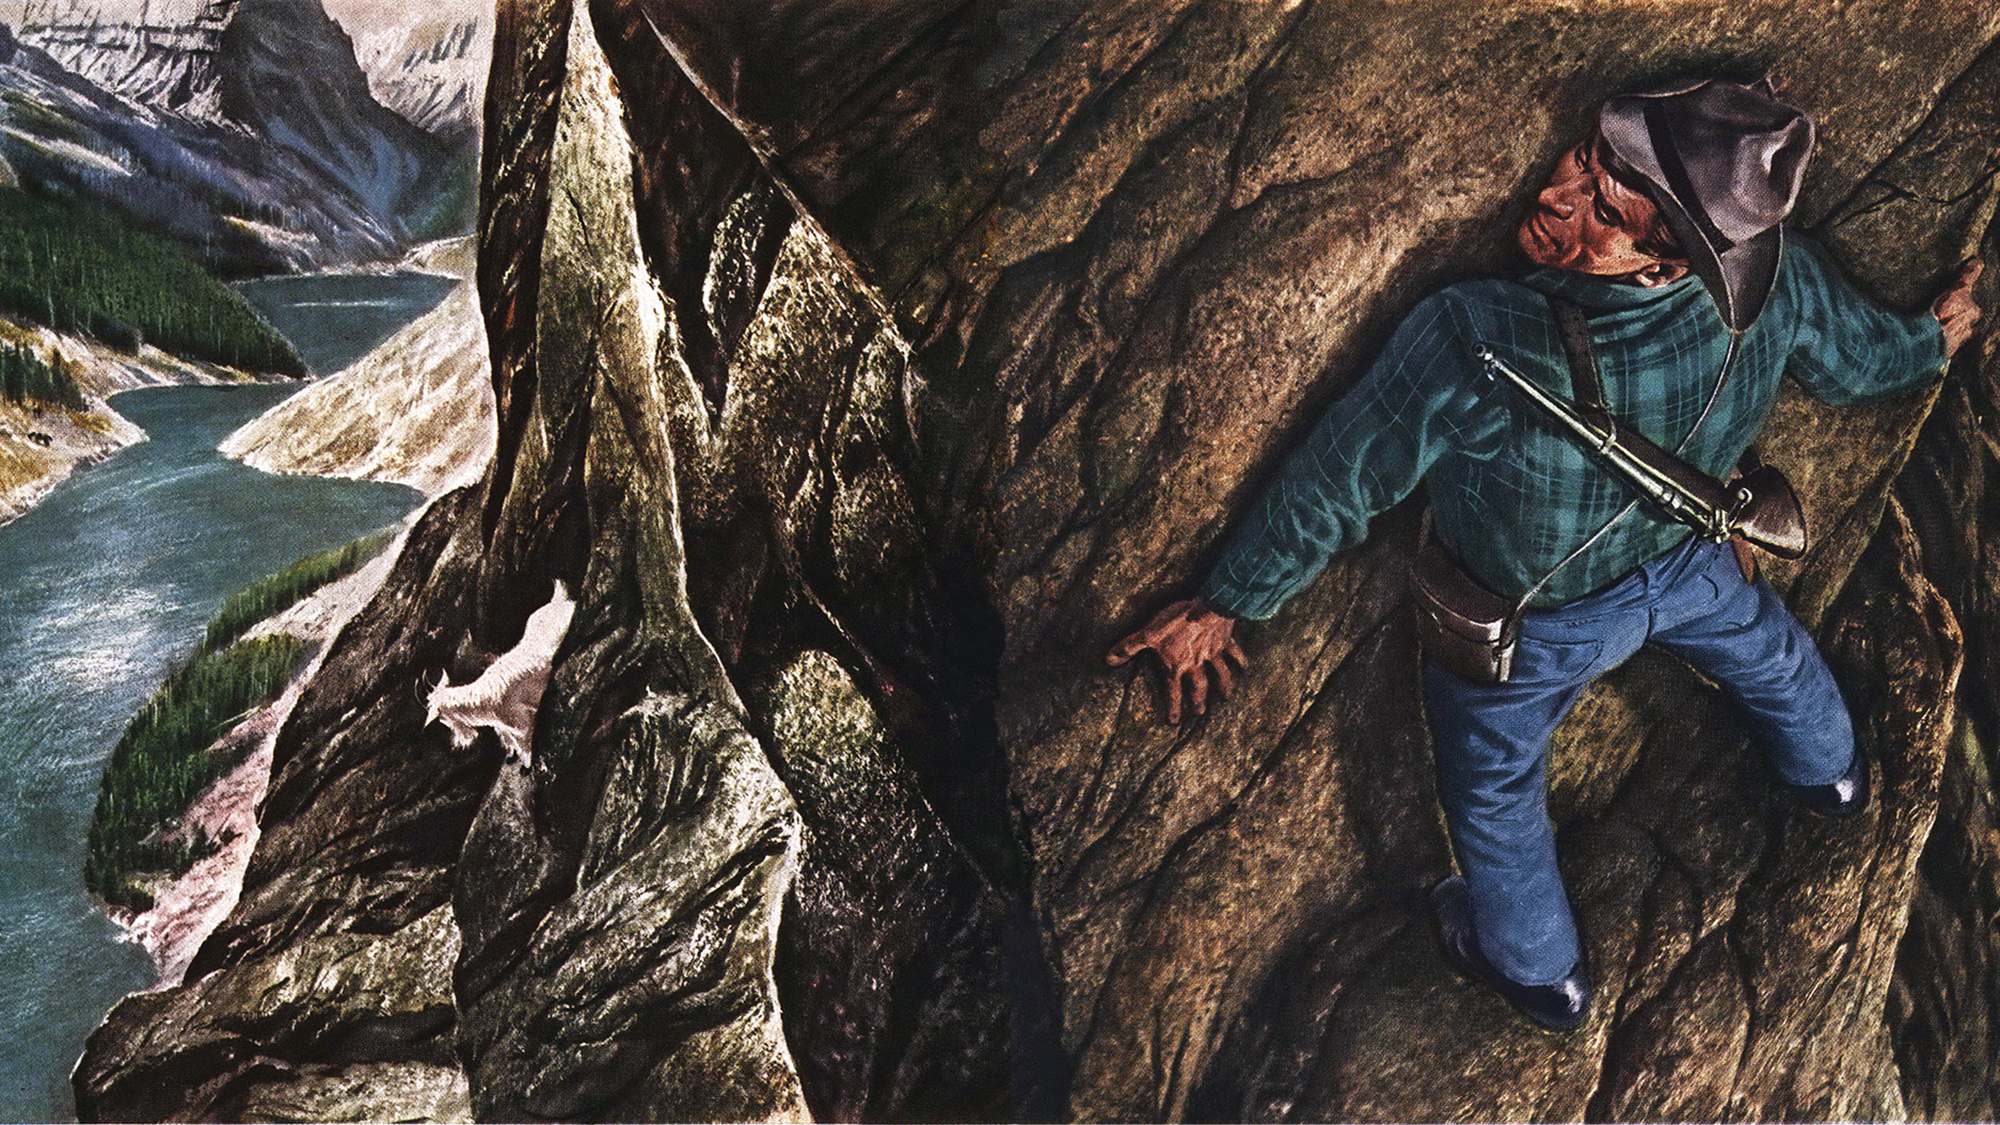 “What if he were to take alarm and come pounding up the narrow trail to which I clung?” This story, “Flesh and Rock,” originally ran in the June 1953 issue.